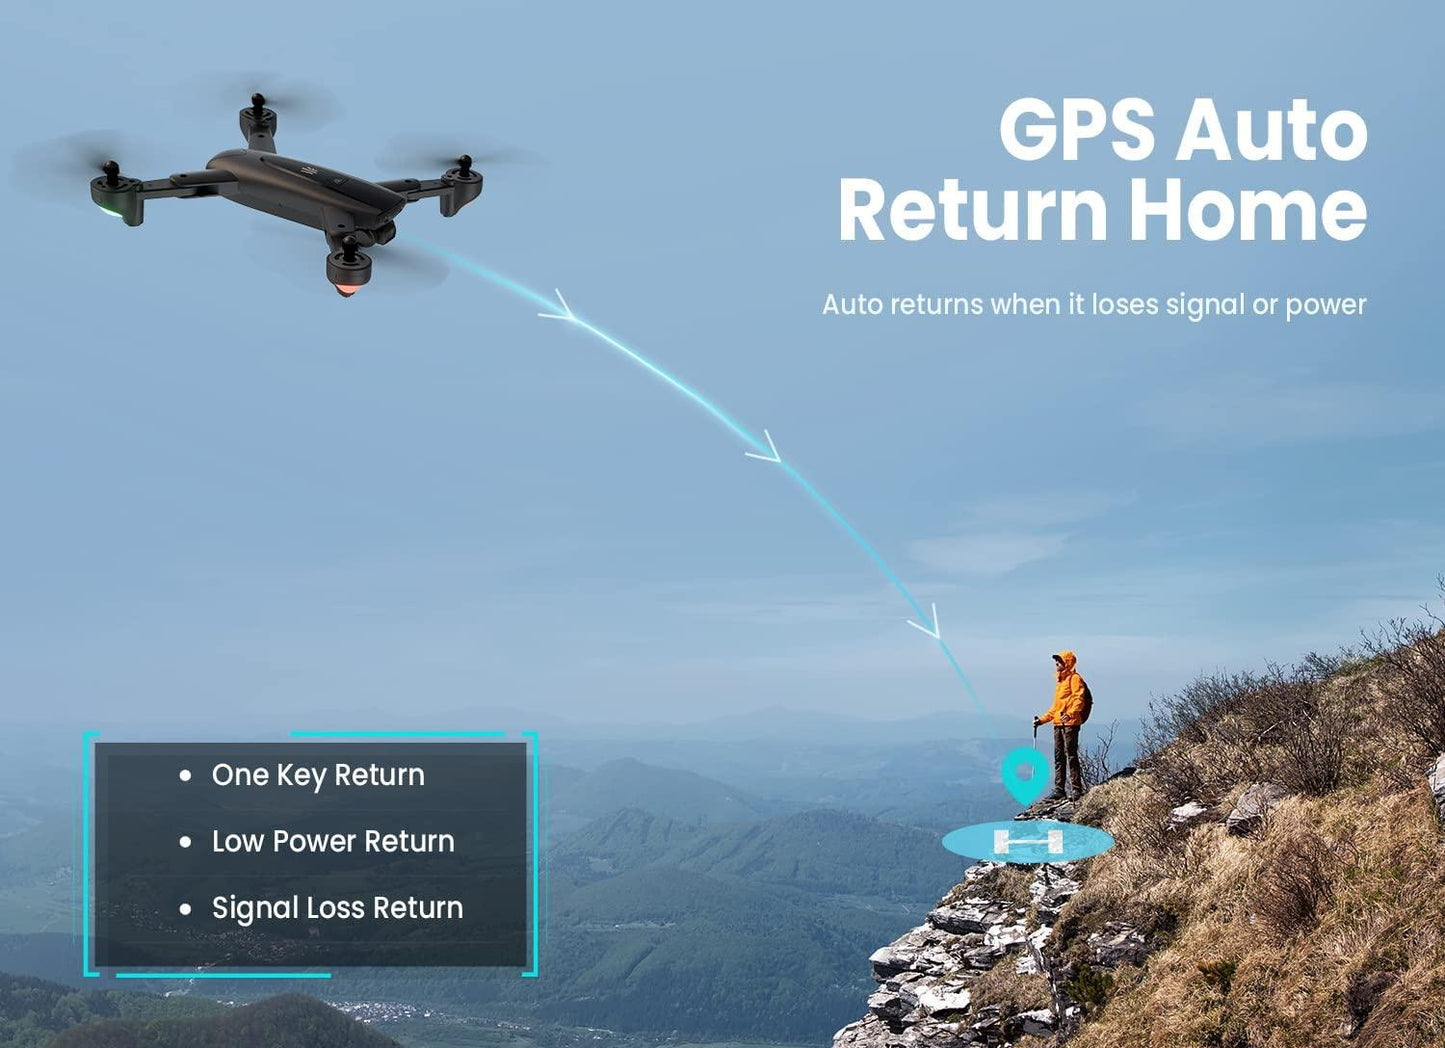 UranHub UG600 Drone - with Camera 4K HD UHD for Adults, GPS Foldable FPV RC Quadcopte for Beginners with 2 Batteries, Auto Return, Follow Me, Gesture Control, Point of Interest, Waypoints Professional Camera Drone - RCDrone